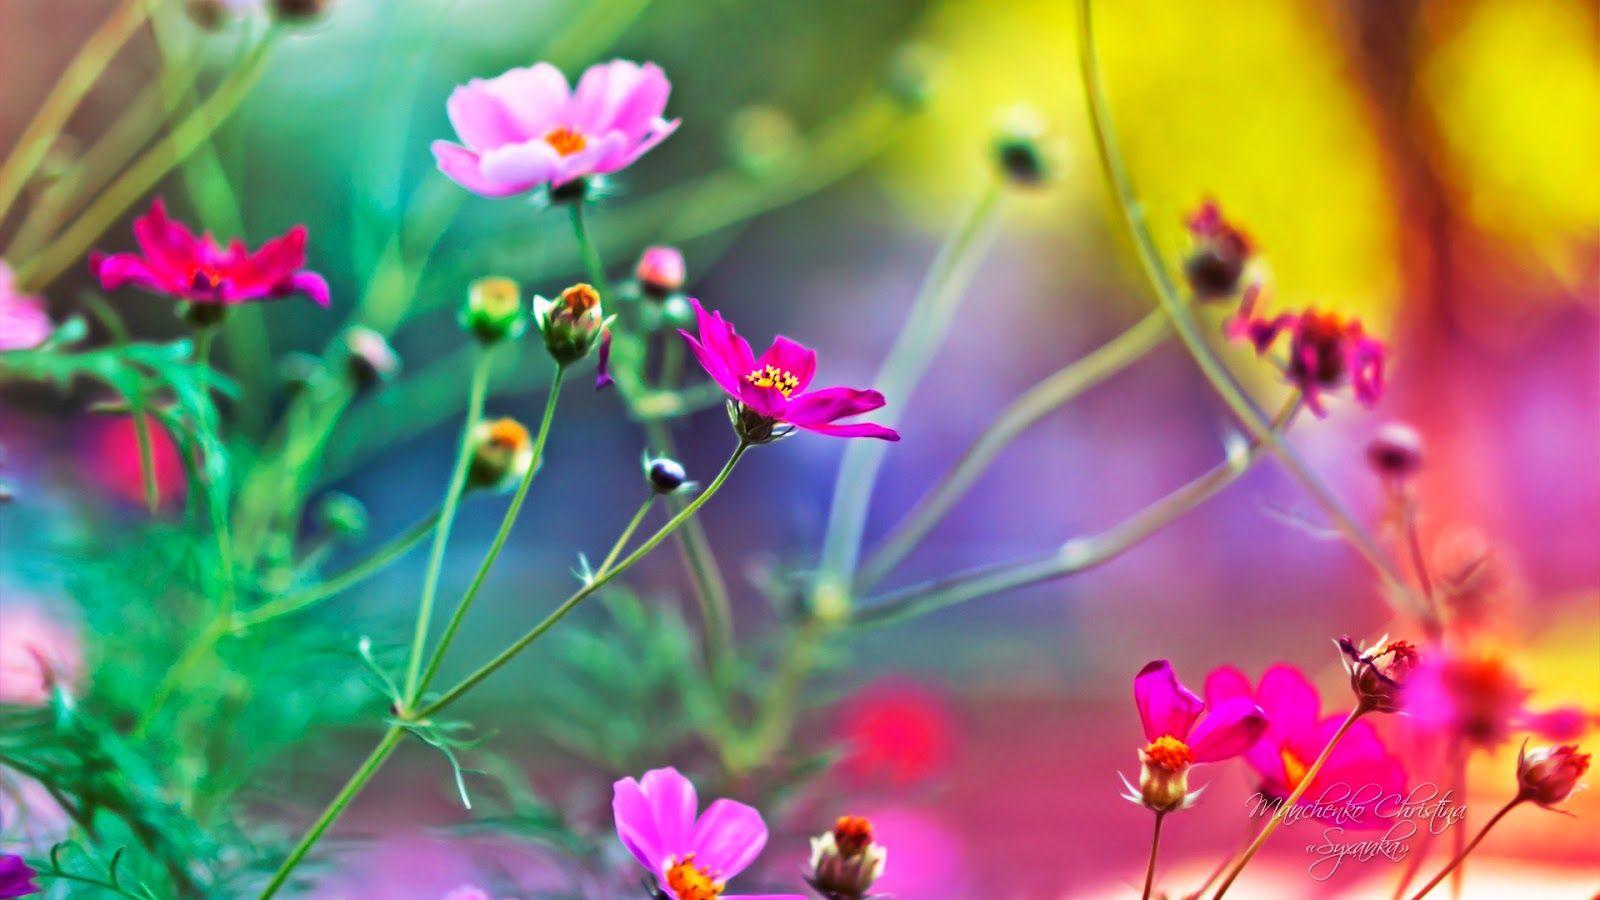 Lovely Image Of Flowers HD Wallpaper. High Definition Wallpaper